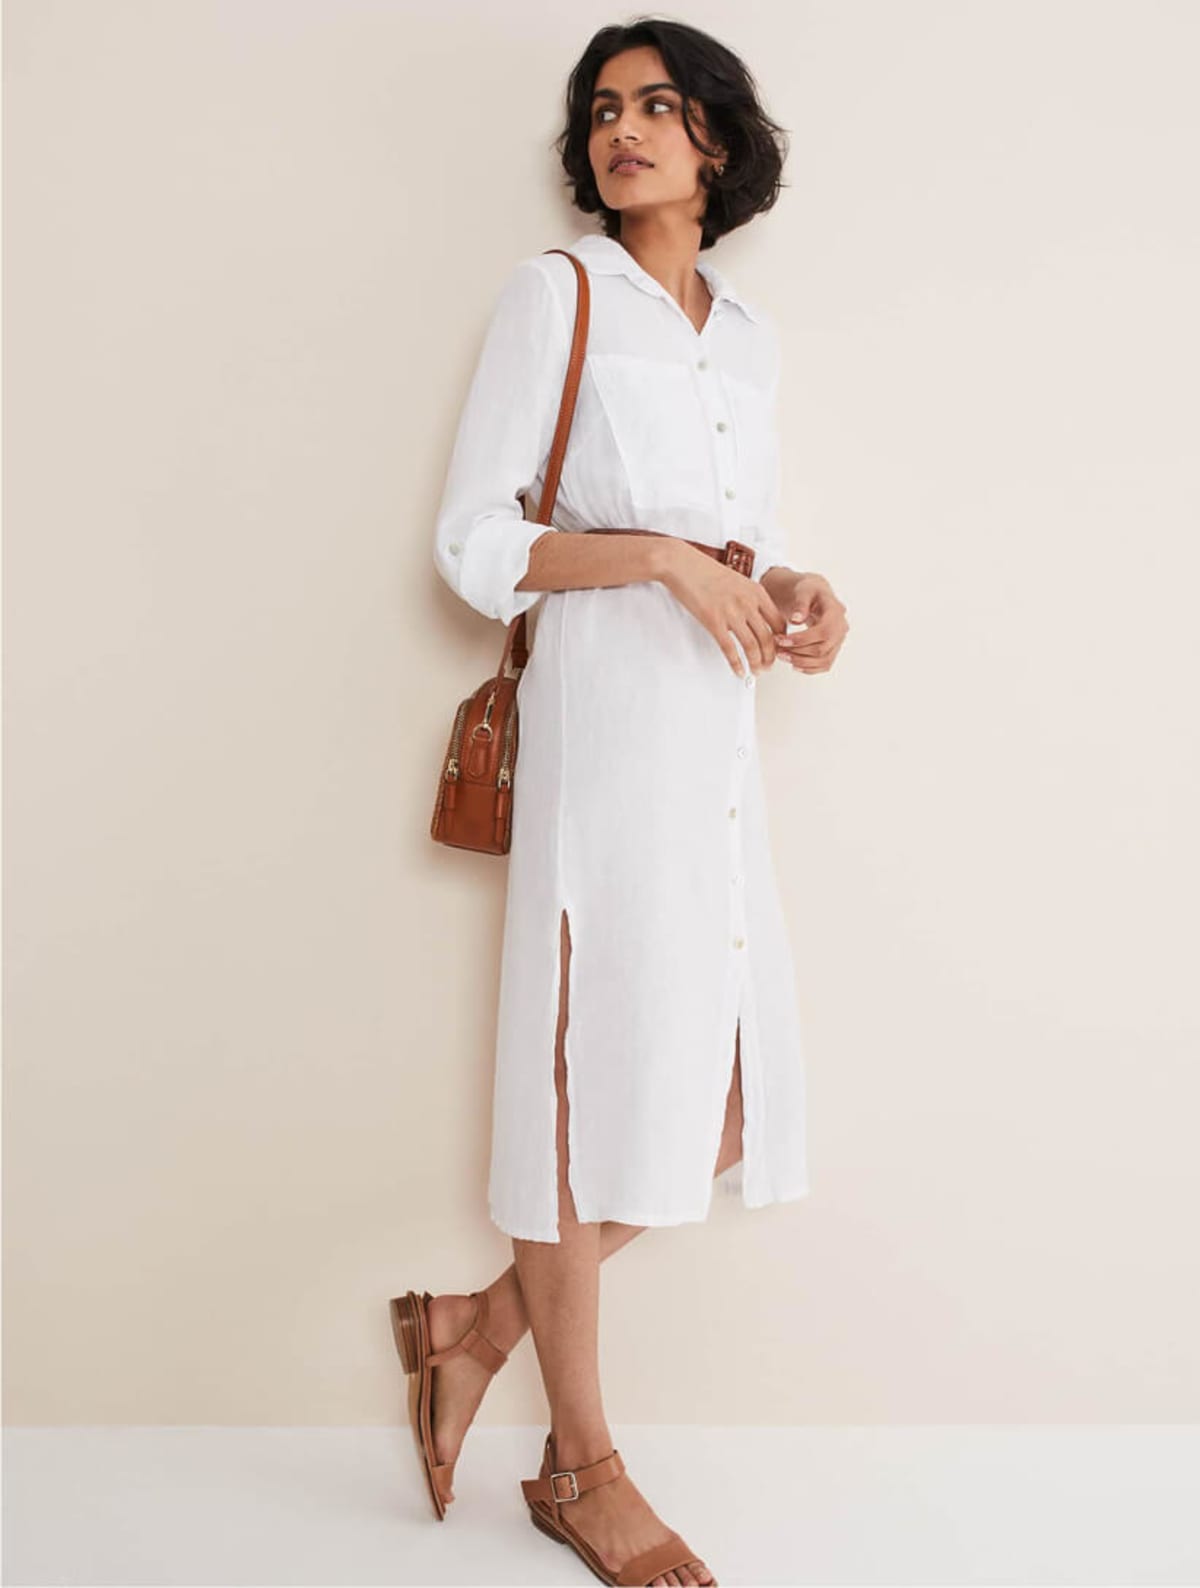 Woman wearing white linen shirt dress with brown bag and brown sandals